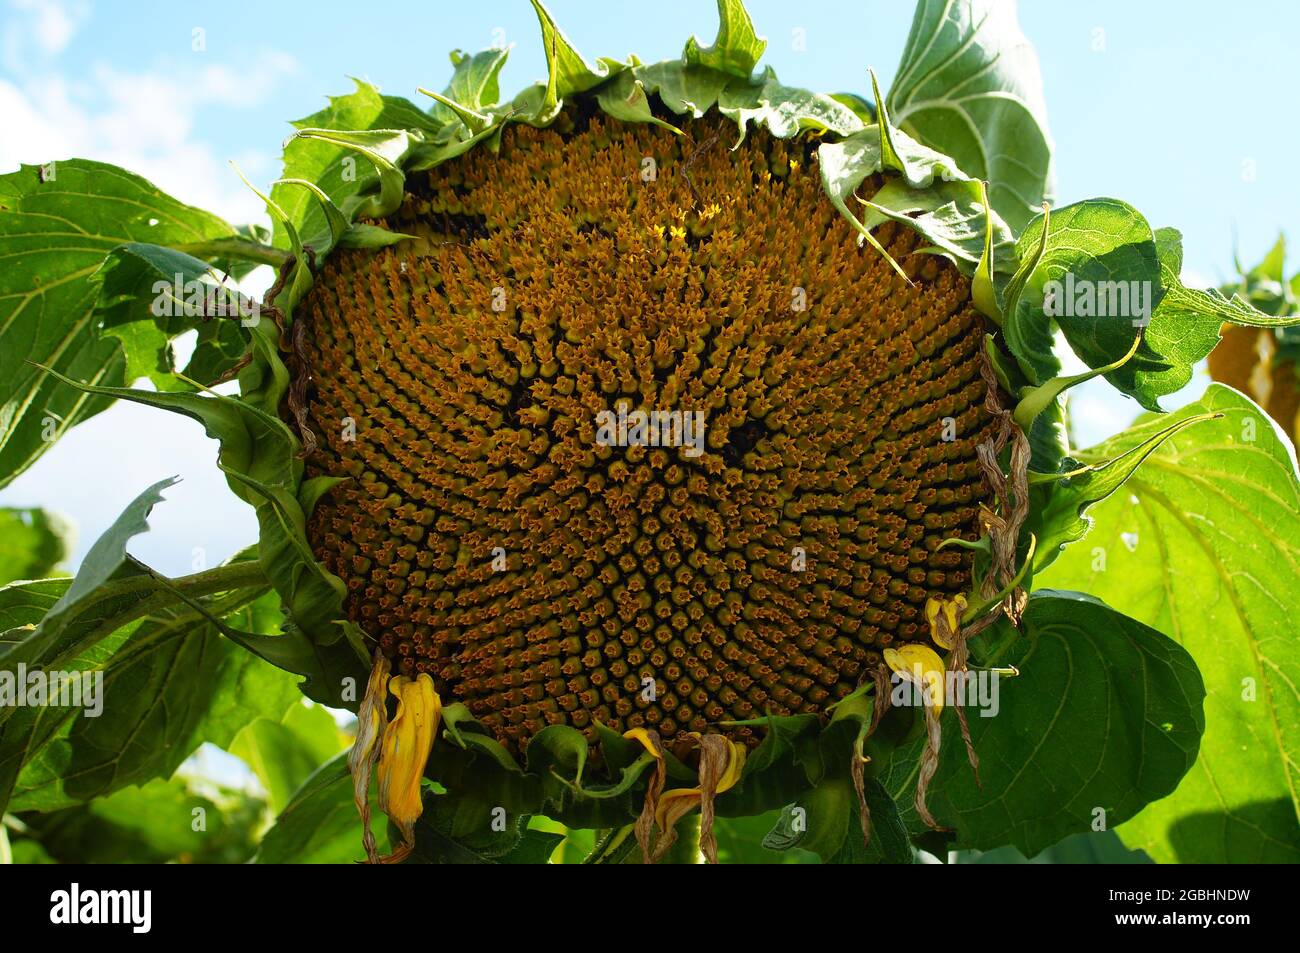 Ripening receptacle of a sunflower Stock Photo - Alamy